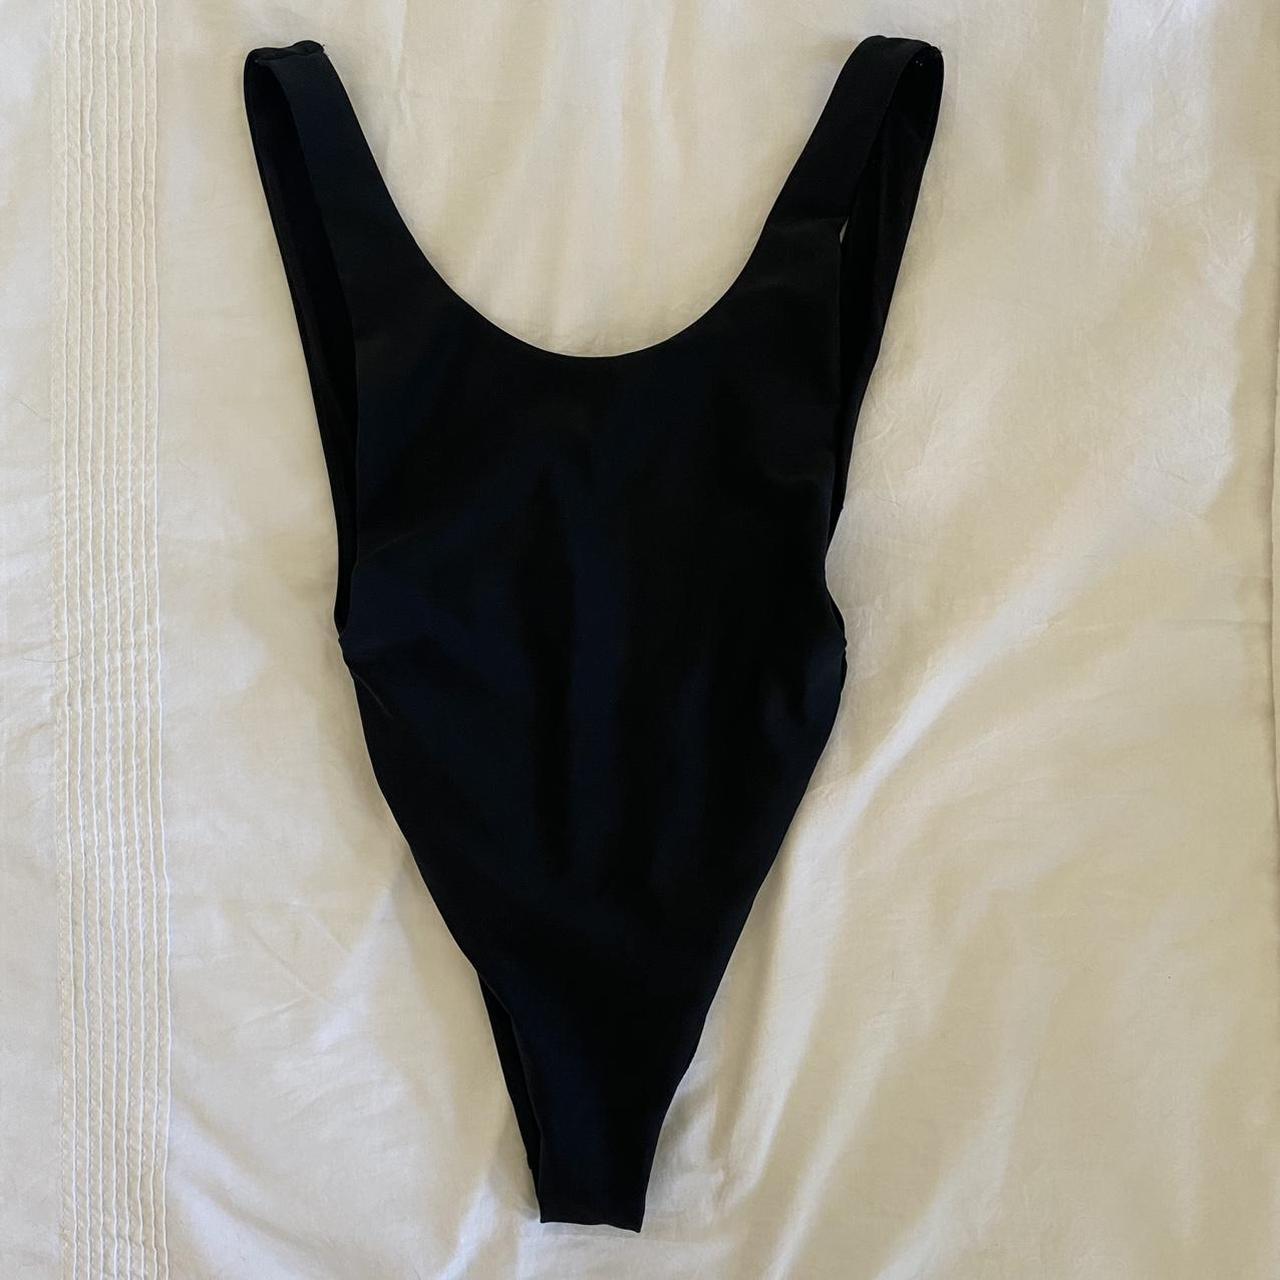 Aerie one piece black swimsuit with scoop back Very... - Depop